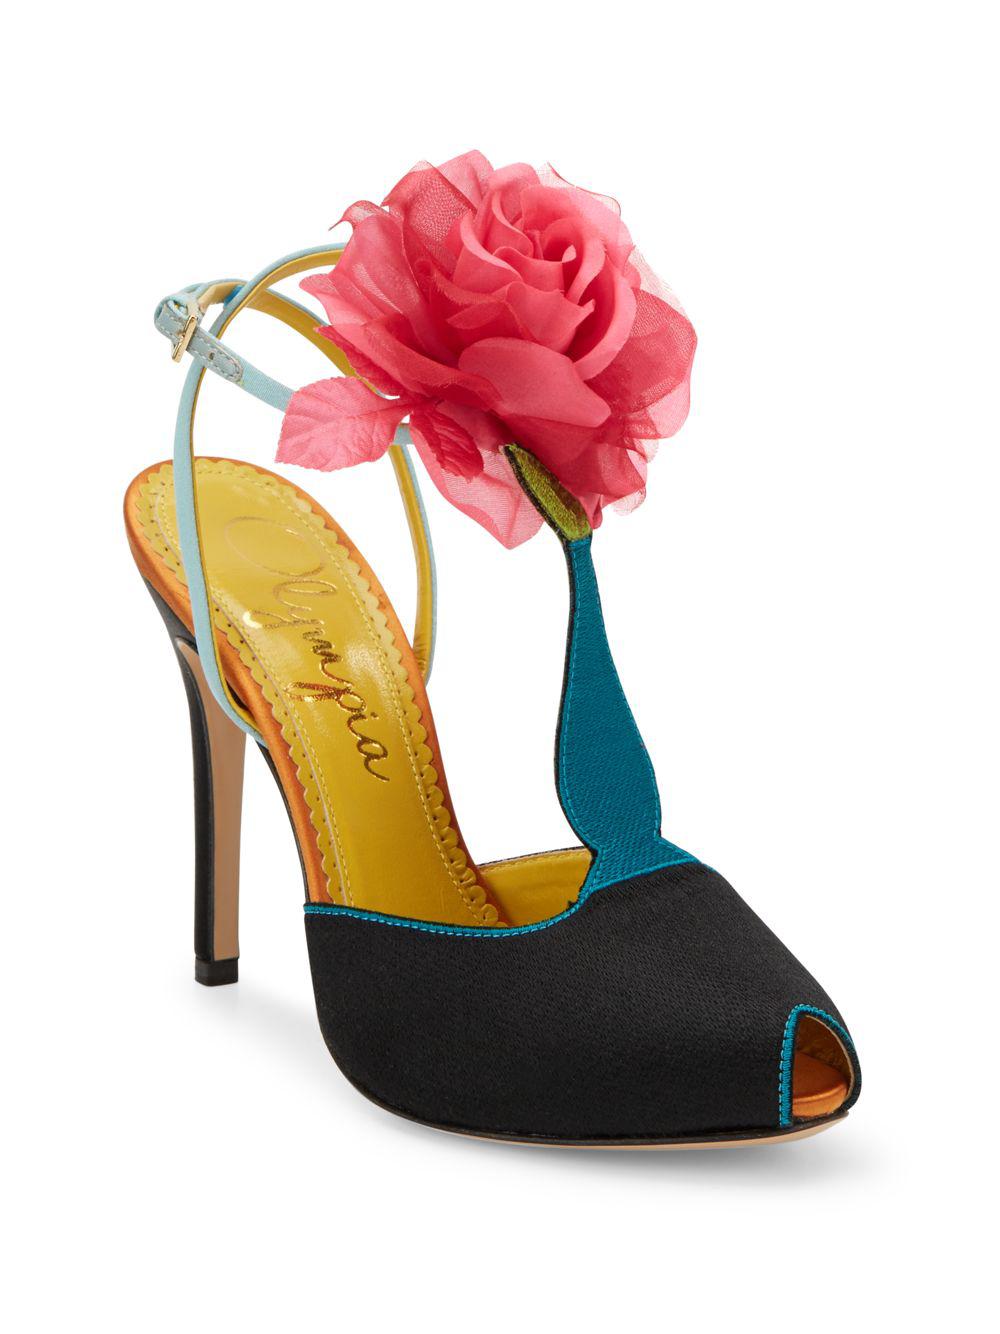 Charlotte Olympia Leather Amphora Rosette T-strap Peep Toe Pumps in Red ...